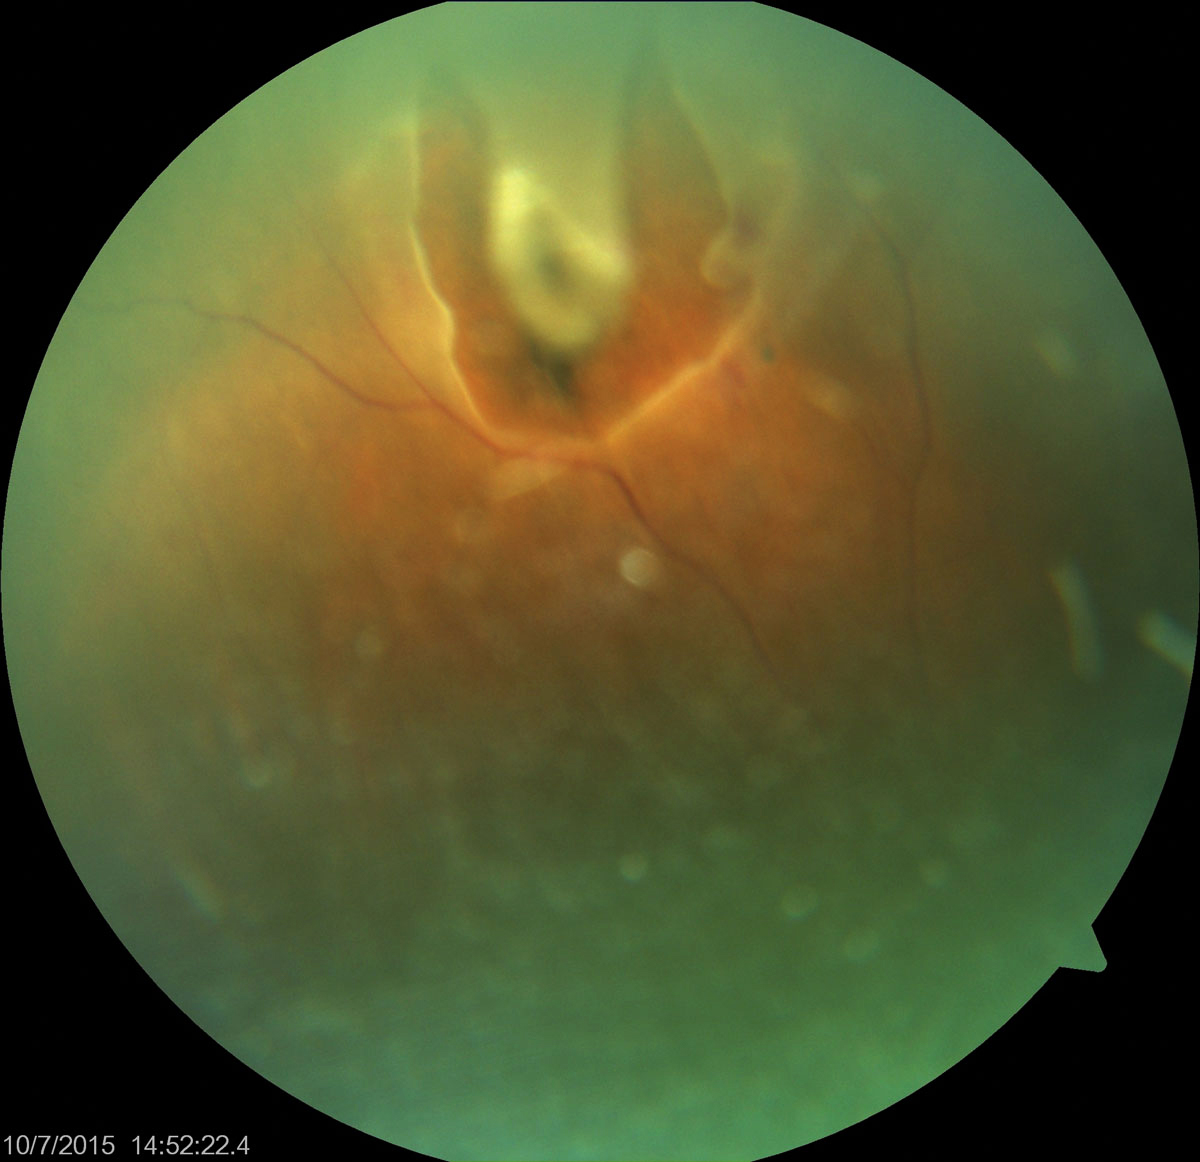 Similar studies reported ultra-widefield imaging sensitivities for retinal detachments and peripheral retinal lesions ranging from 41% to 86%.